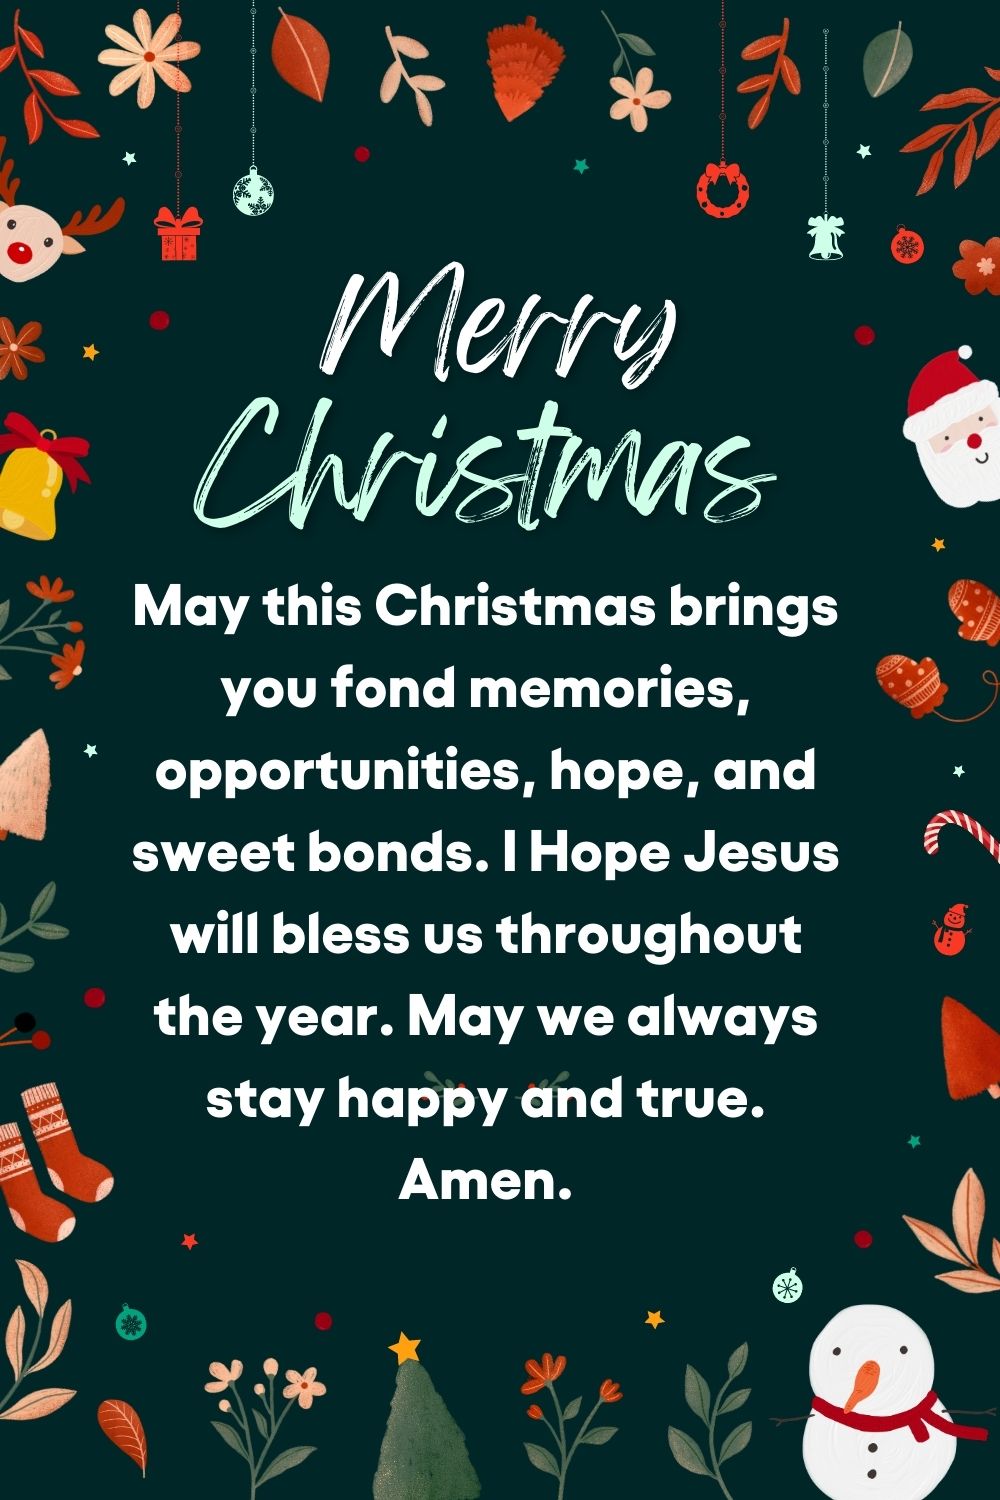 Merry Christmas Messages For Family